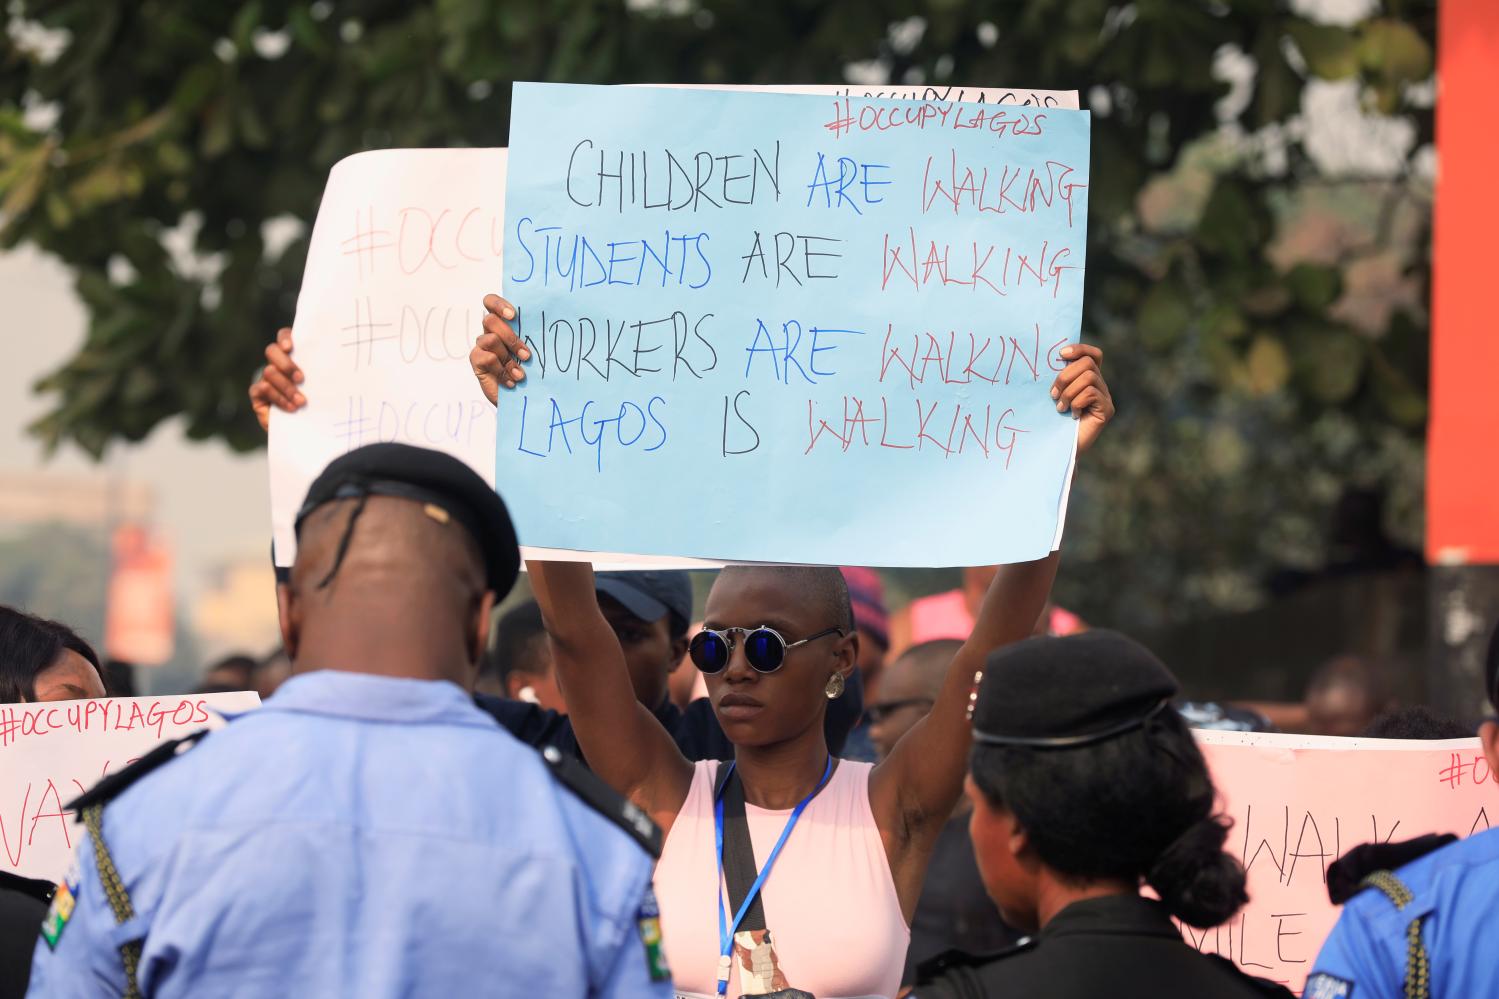 Demonstrators protest with placards against the ban of motorcycles and tricyles in Lagos, Nigeria February 8, 2020. REUTERS/Temilade Adelaja